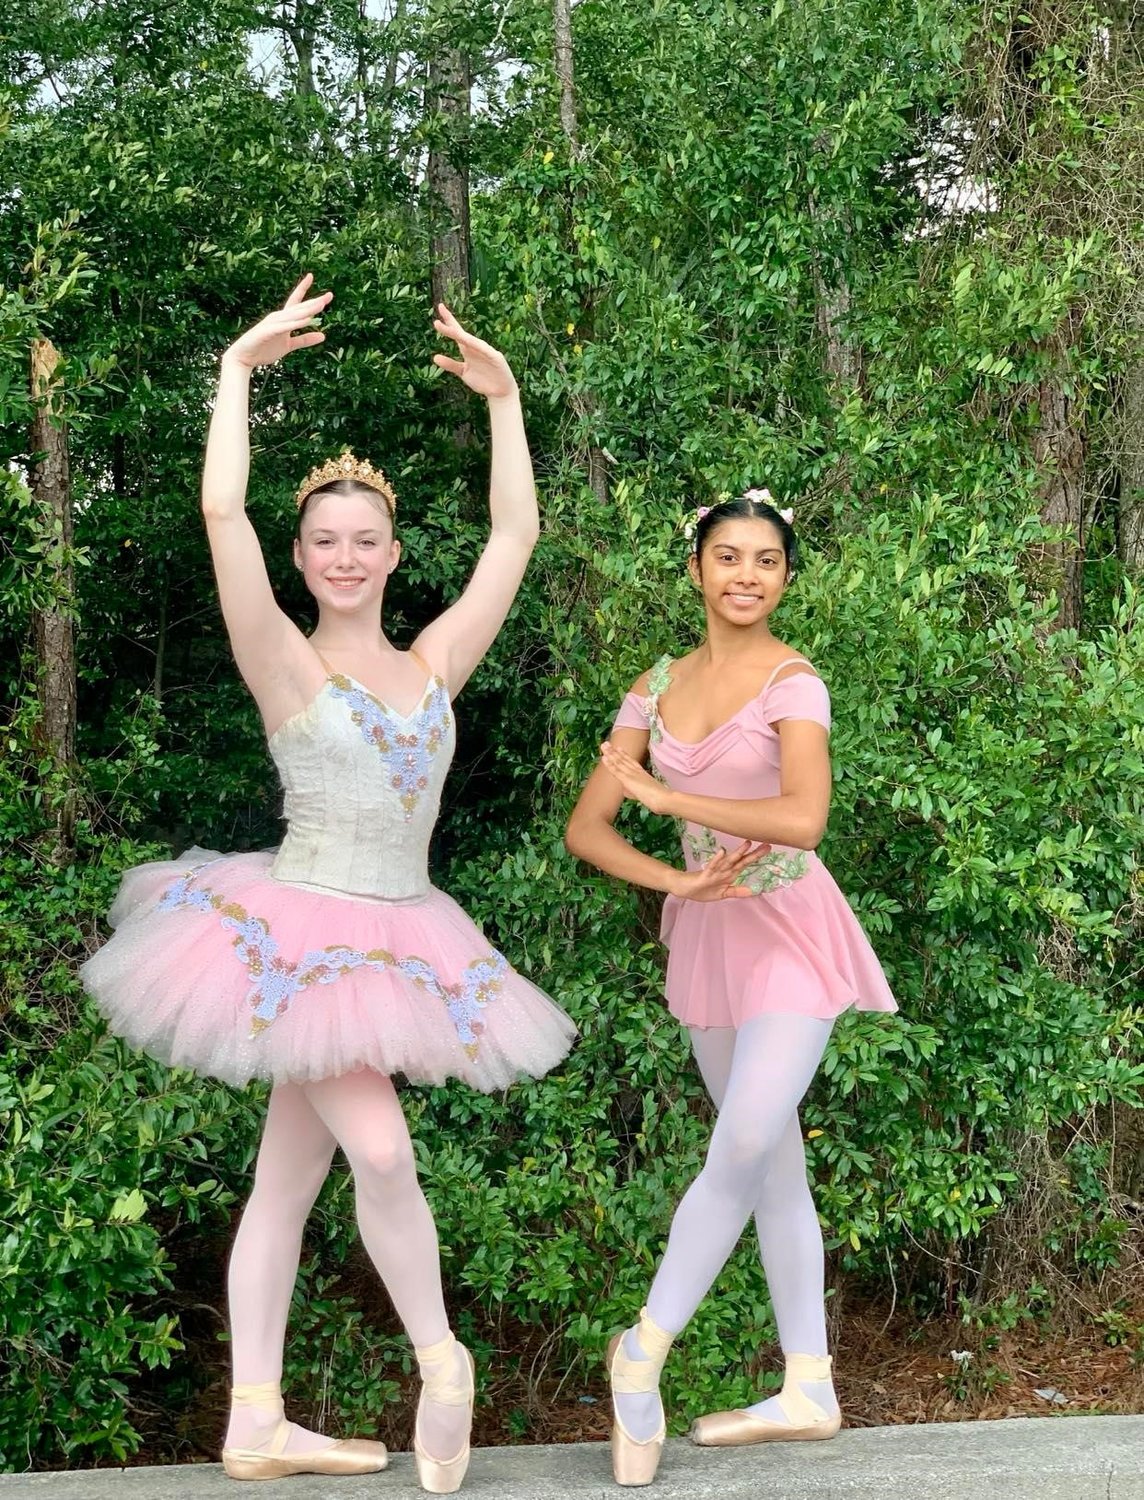 Saint Augustine Ballet will present “Peter and the Wolf” and “Don Quixote Suite” on May 21.